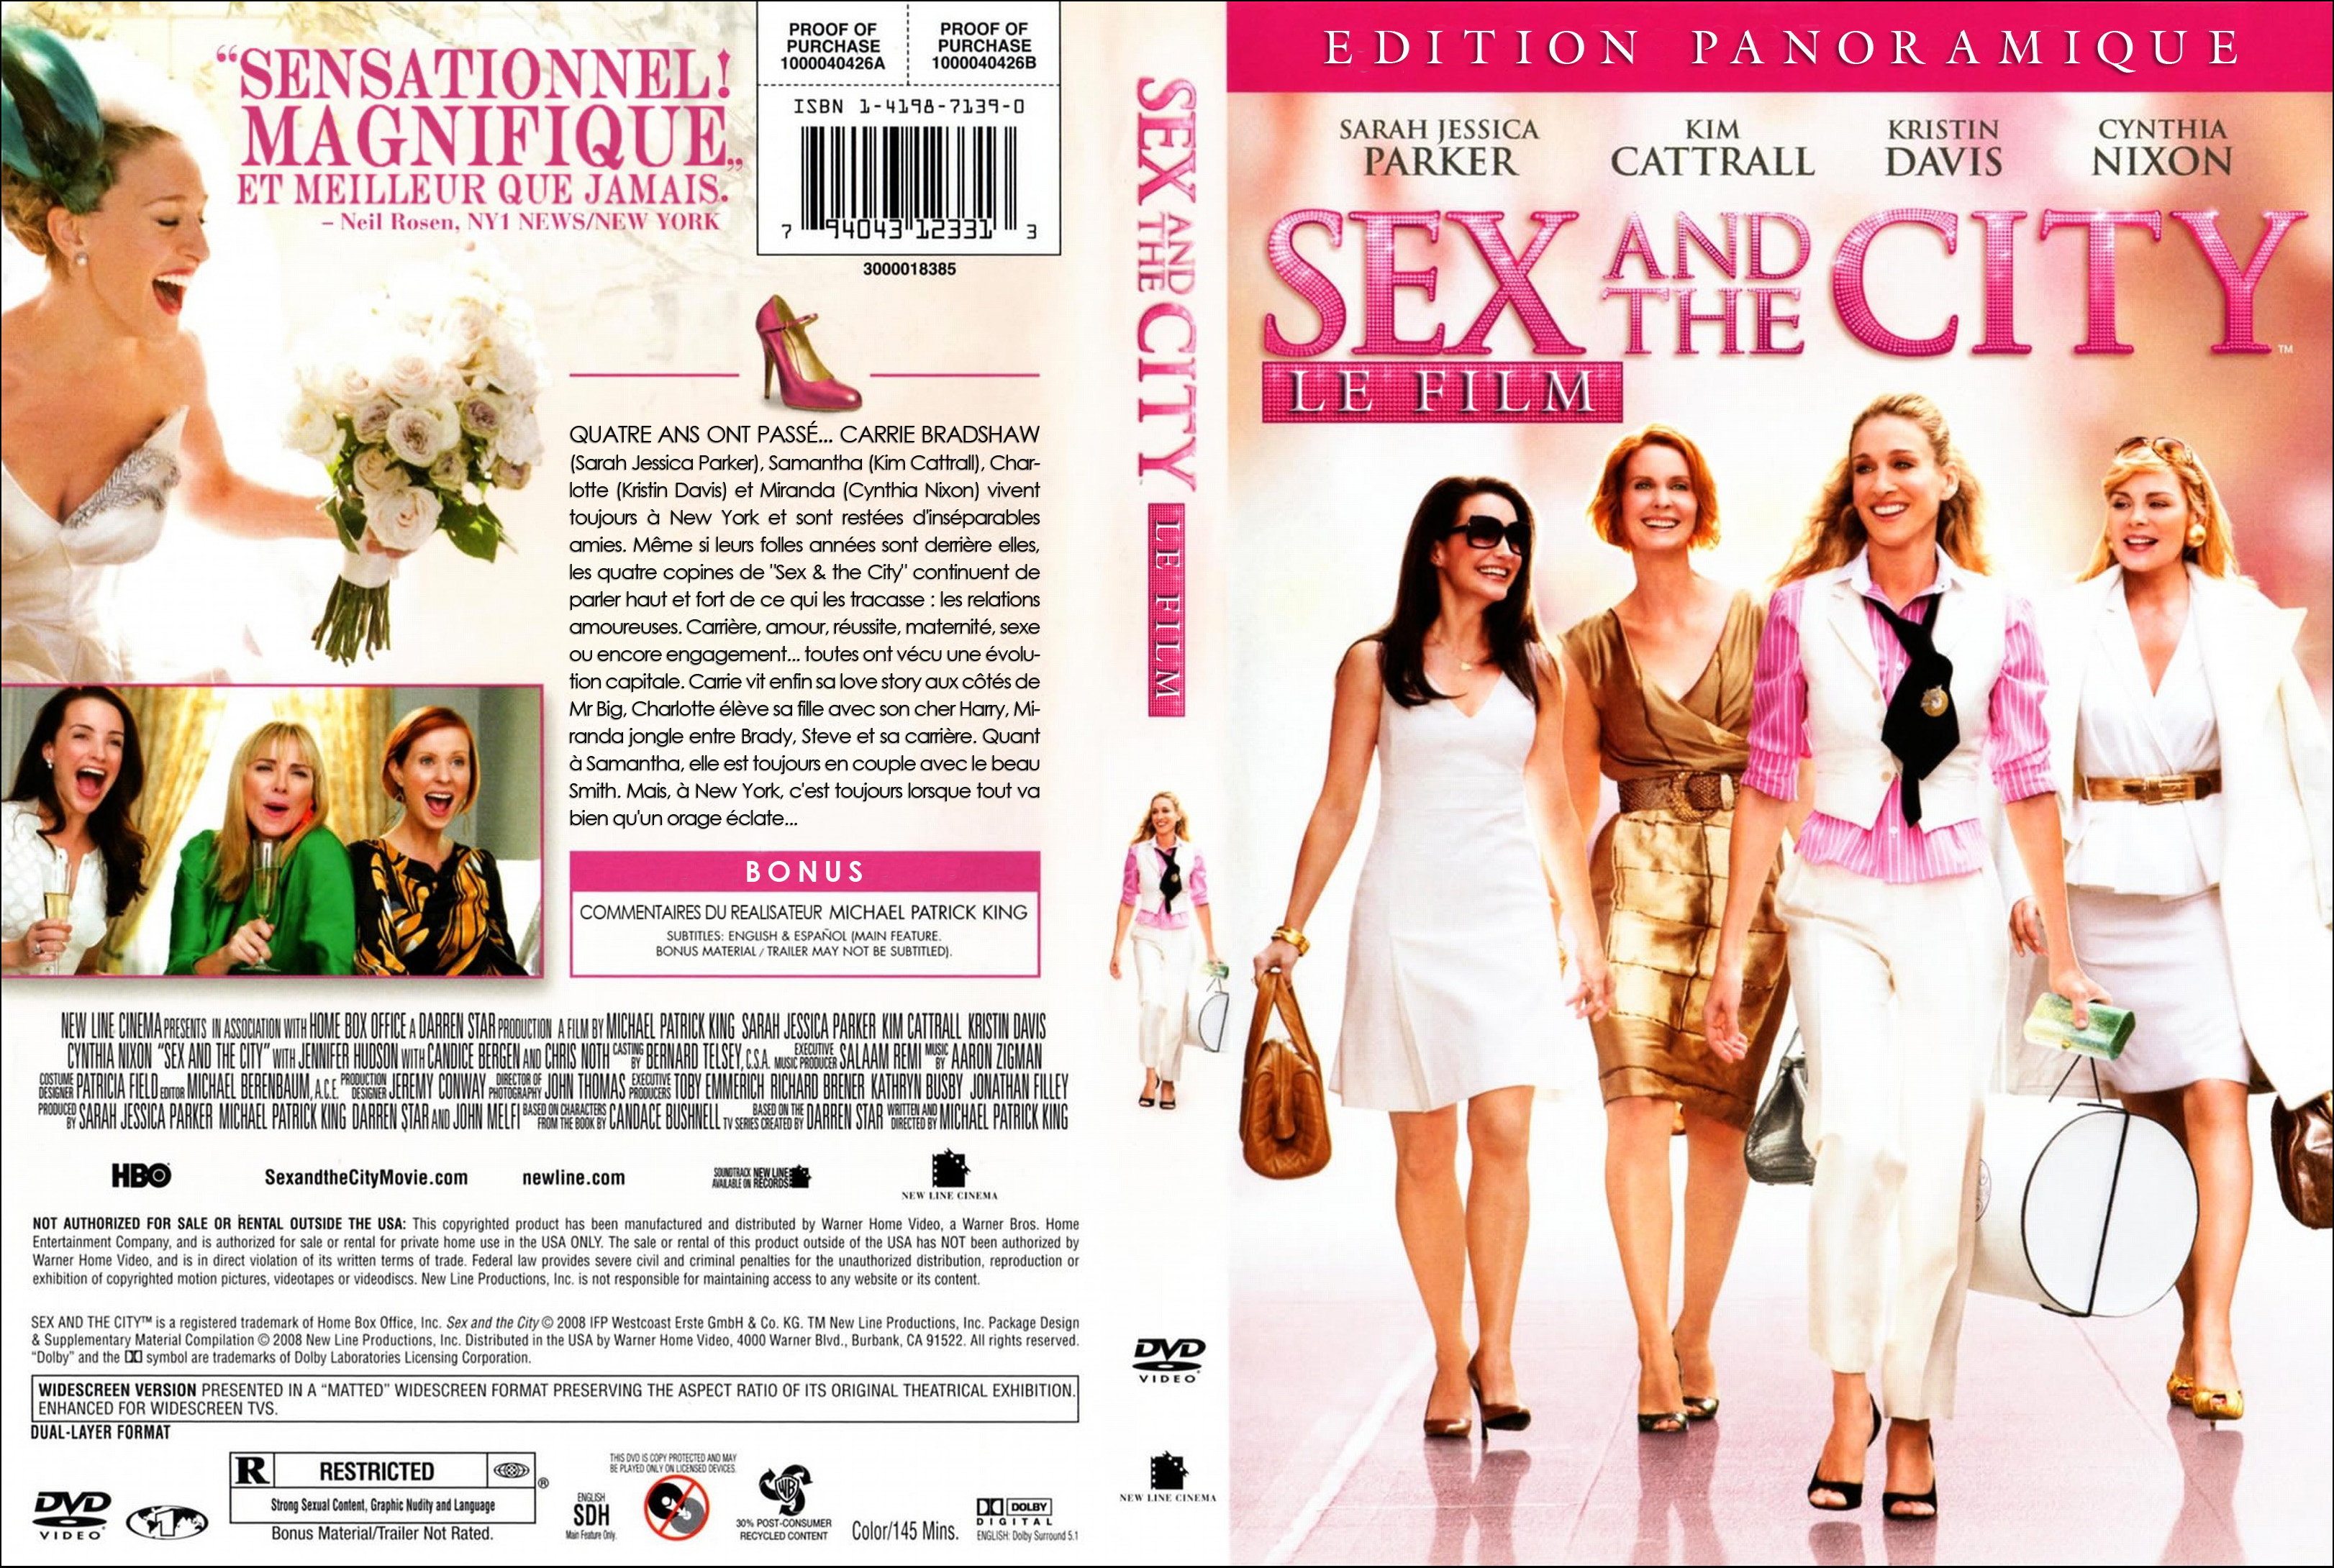 Jaquette DVD Sex and the city le film (Canadienne)